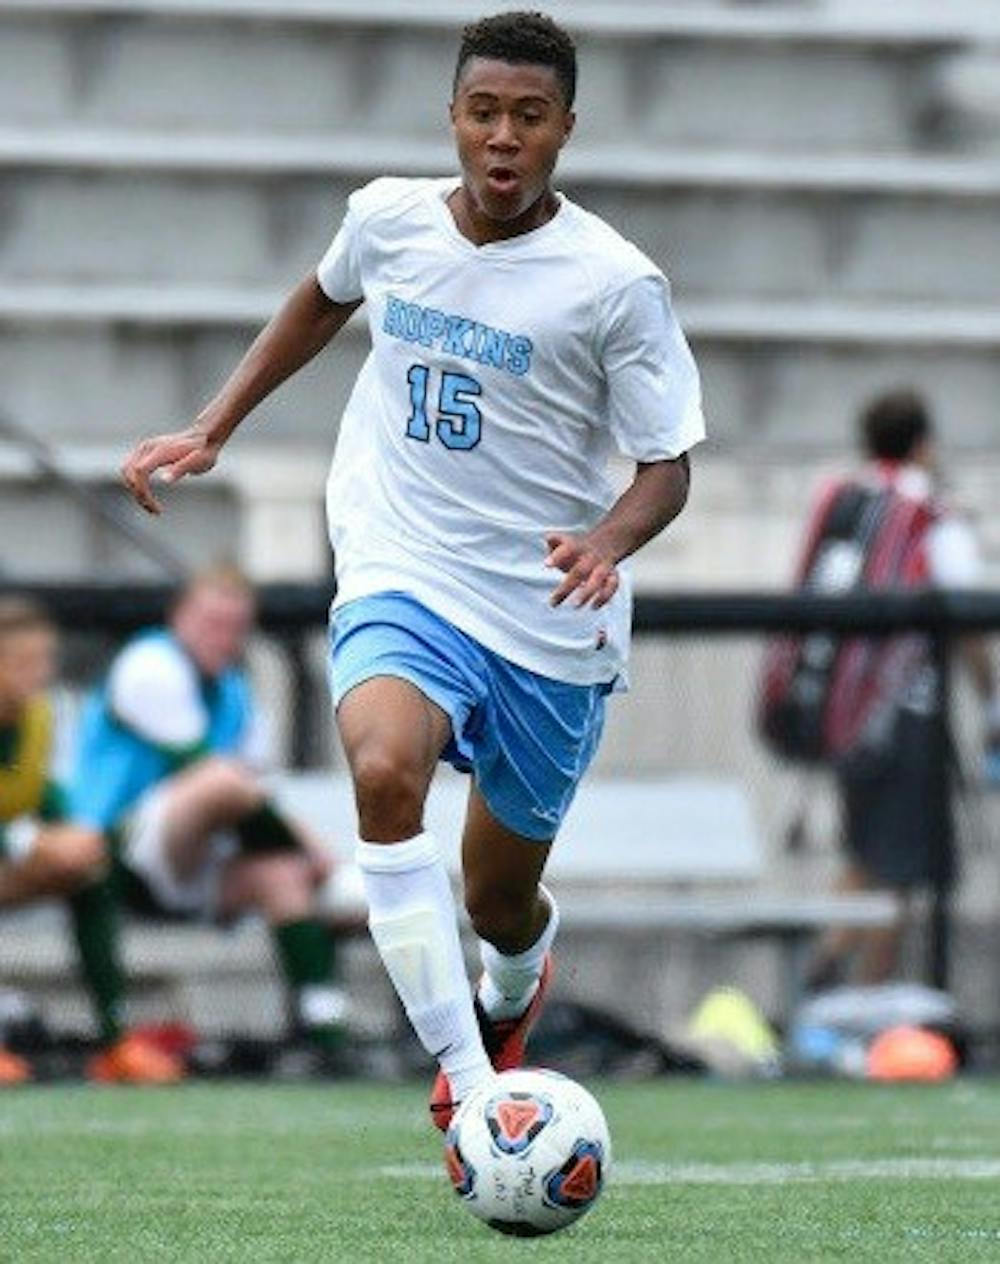 HOPKINSSPORTS.COM
Younker leads the Jays in goals scored in just his first year at Hopkins